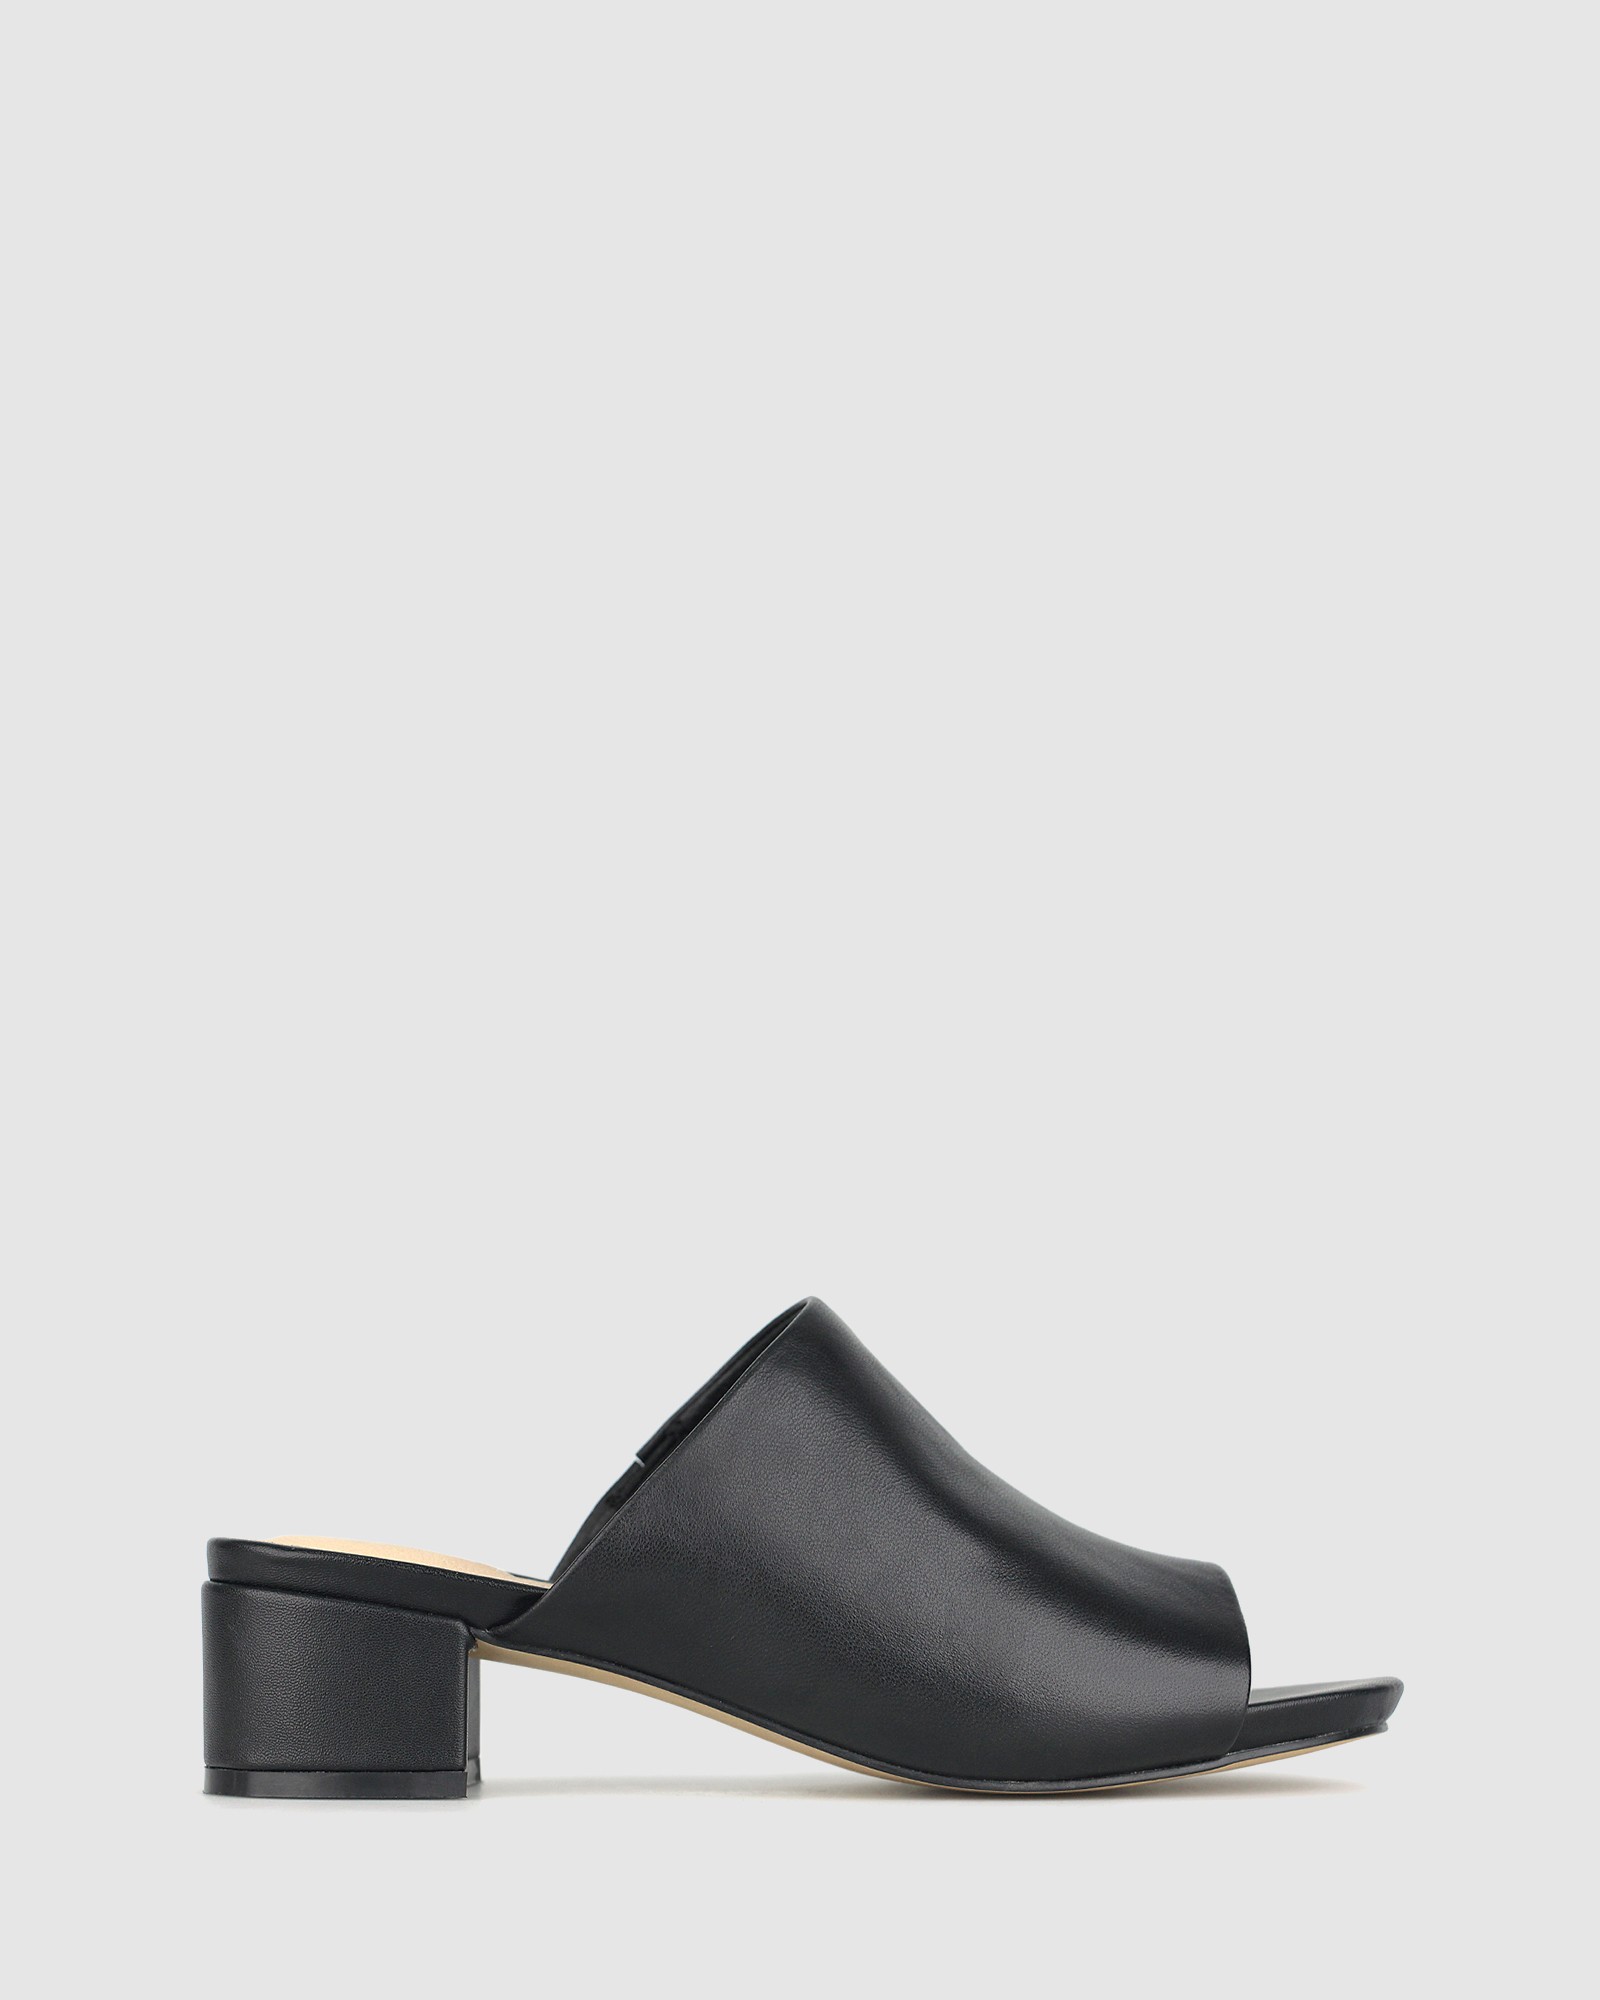 Playground Leather Block Heel Mules Black by Airflex | ShoeSales